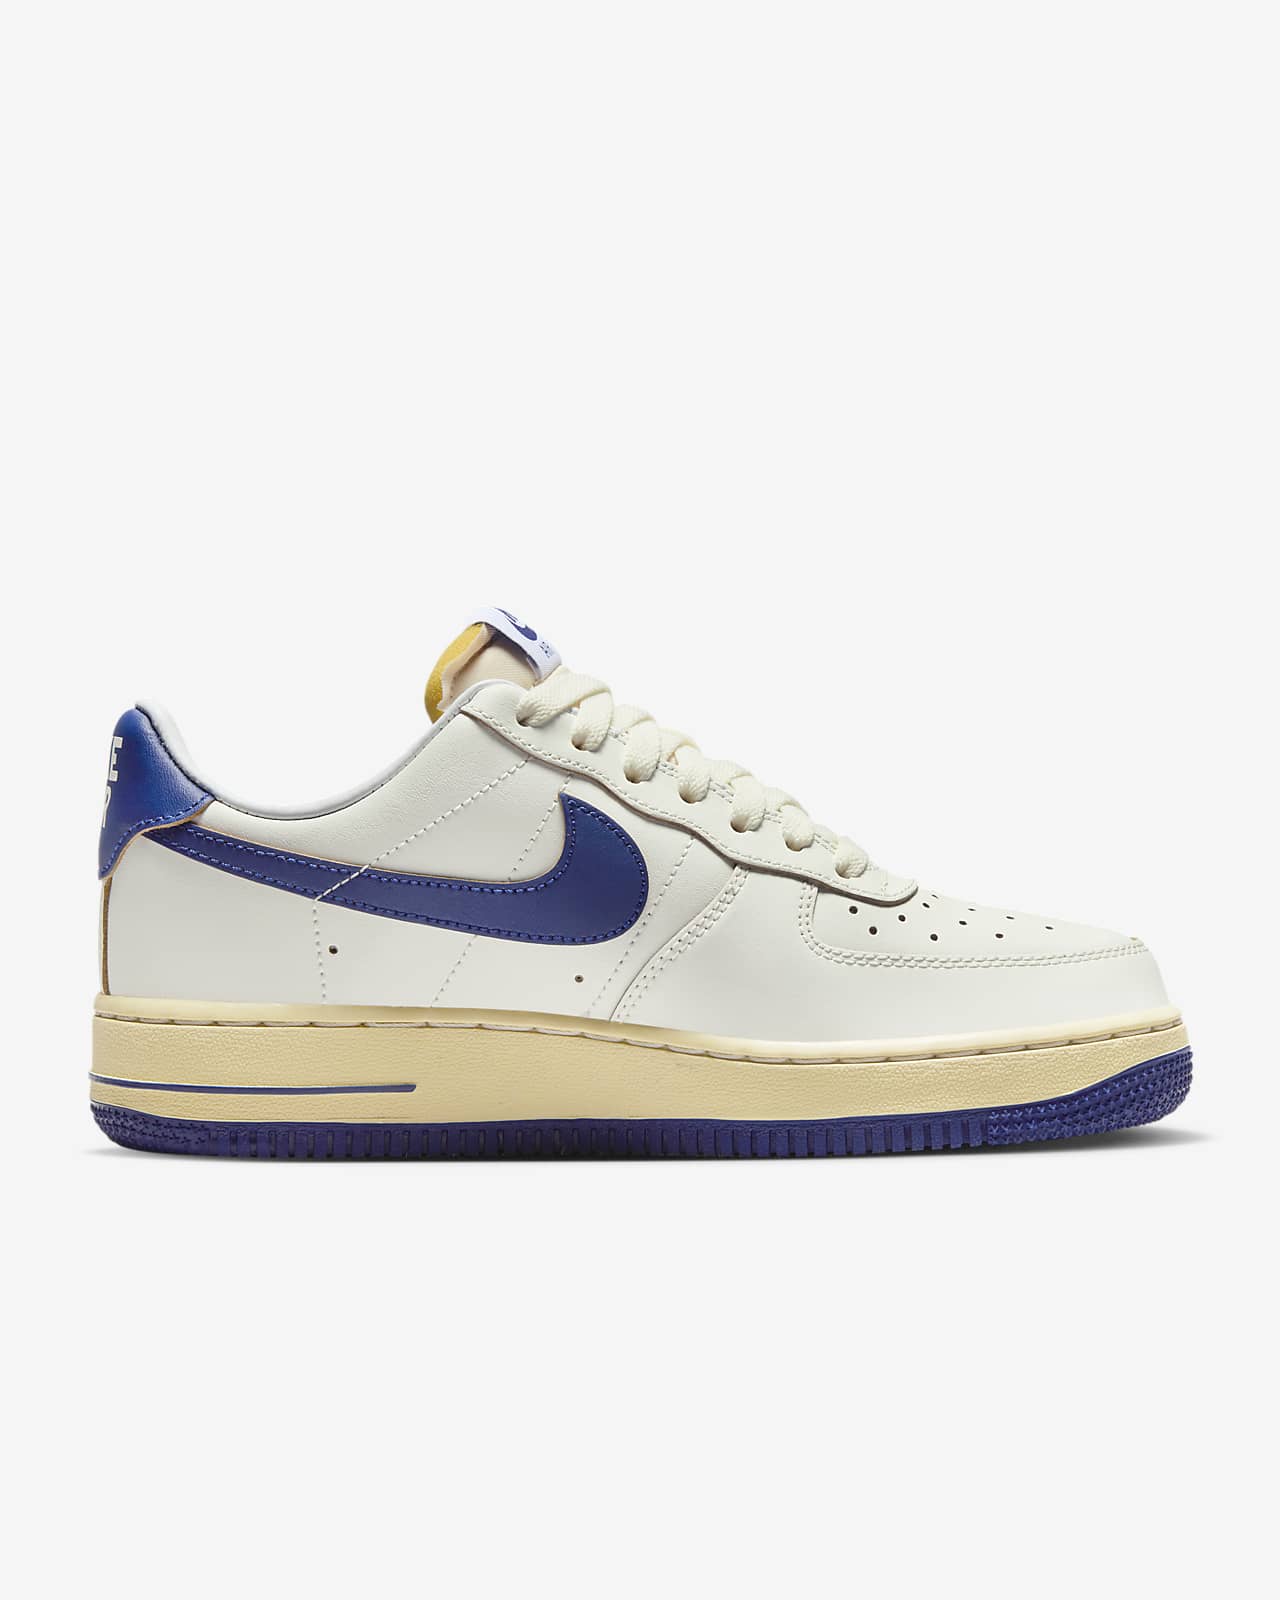 Nike Air Force 1 Low First Use - Blue Suede - Stadium Goods